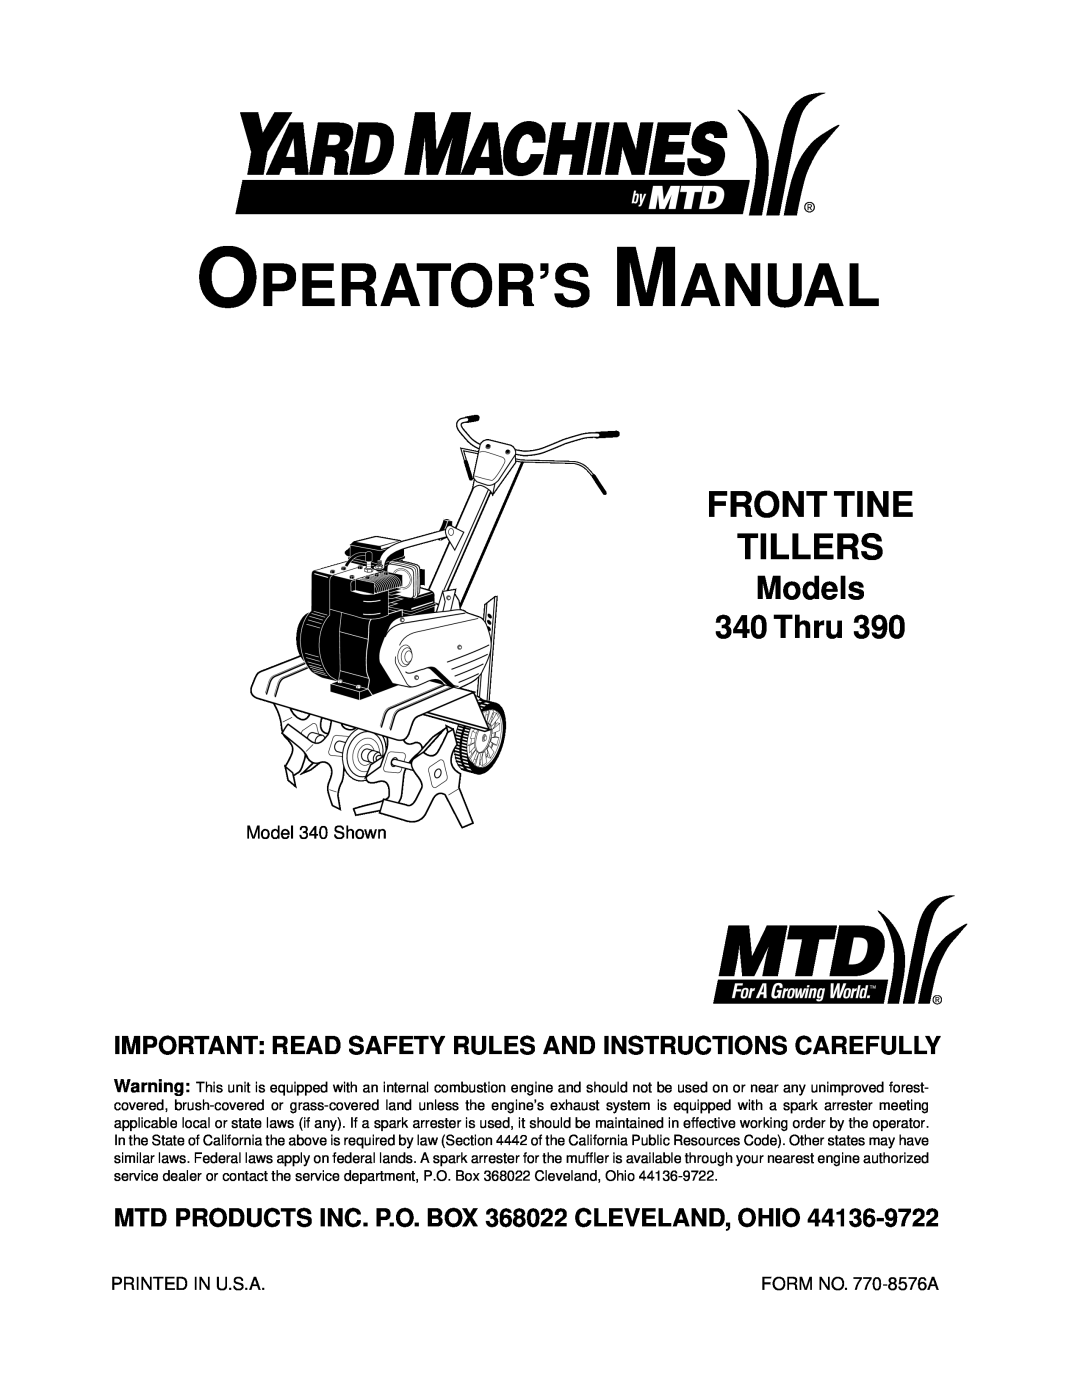 Yard Machines 340 Thru 390 manual Models 340 Thru, Important Read Safety Rules And Instructions Carefully 